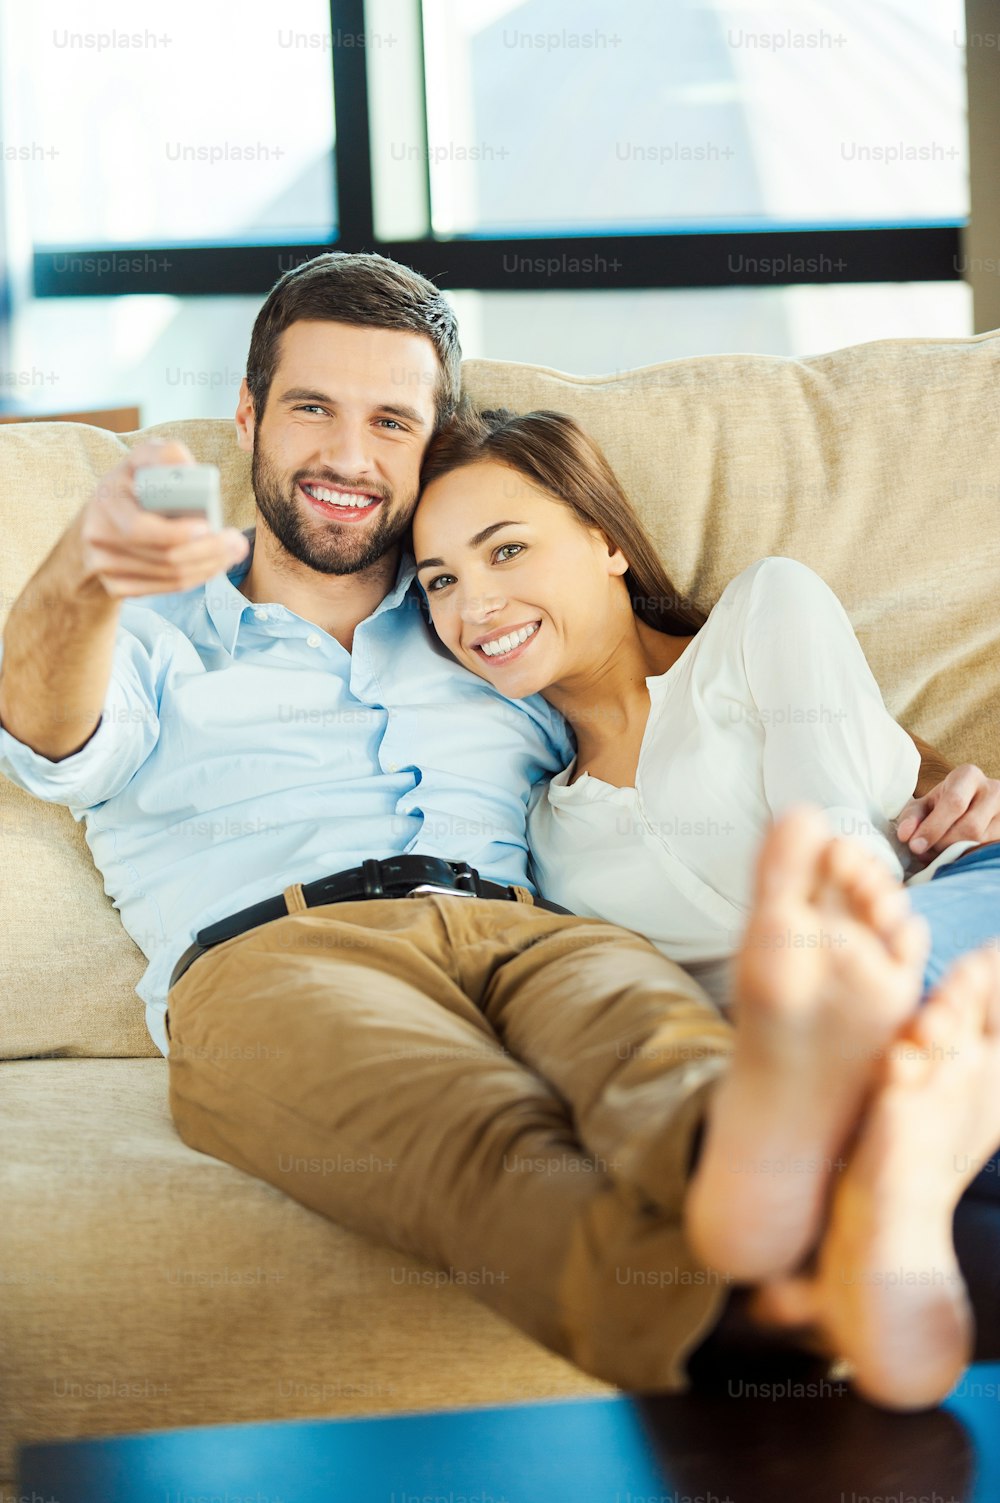 Beautiful young loving couple sitting together on the couch and watching TV while man holding remote control and smiling